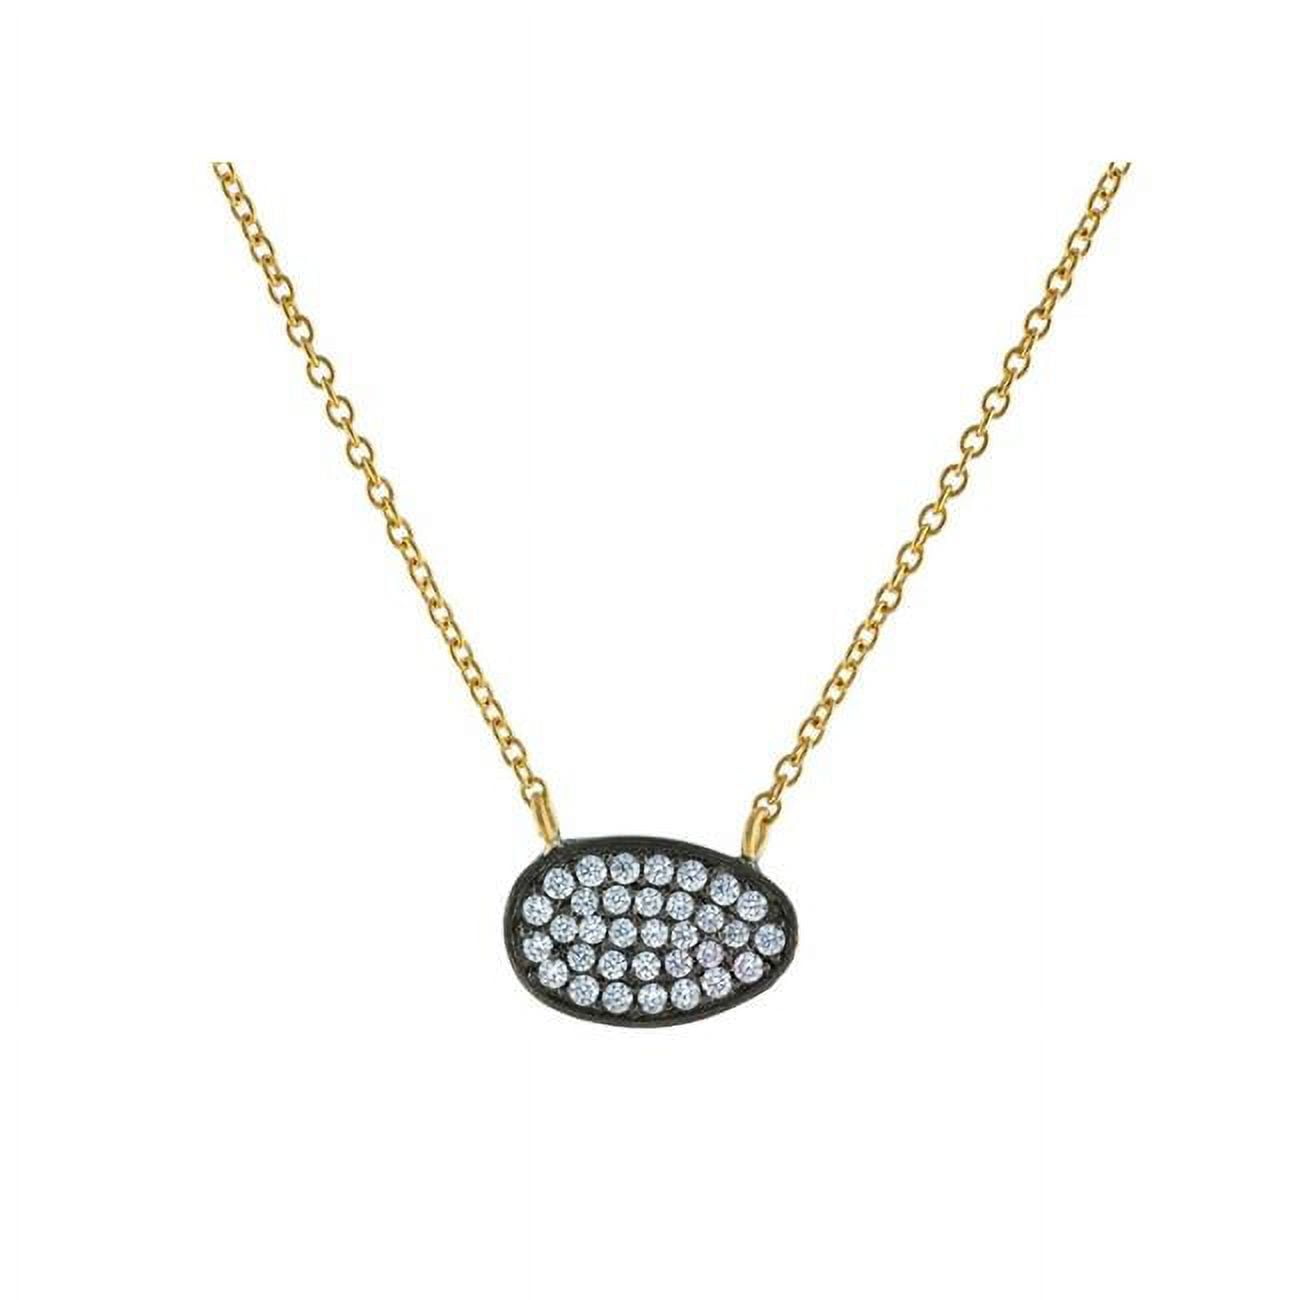 Picture of Fronay Collection 211596GB 16 in. Plus 2 in. Extension Silver Black Rhodium & Gold Plated Chain, Cubic Zirconia Irregular Oval Shape Pendant Necklace